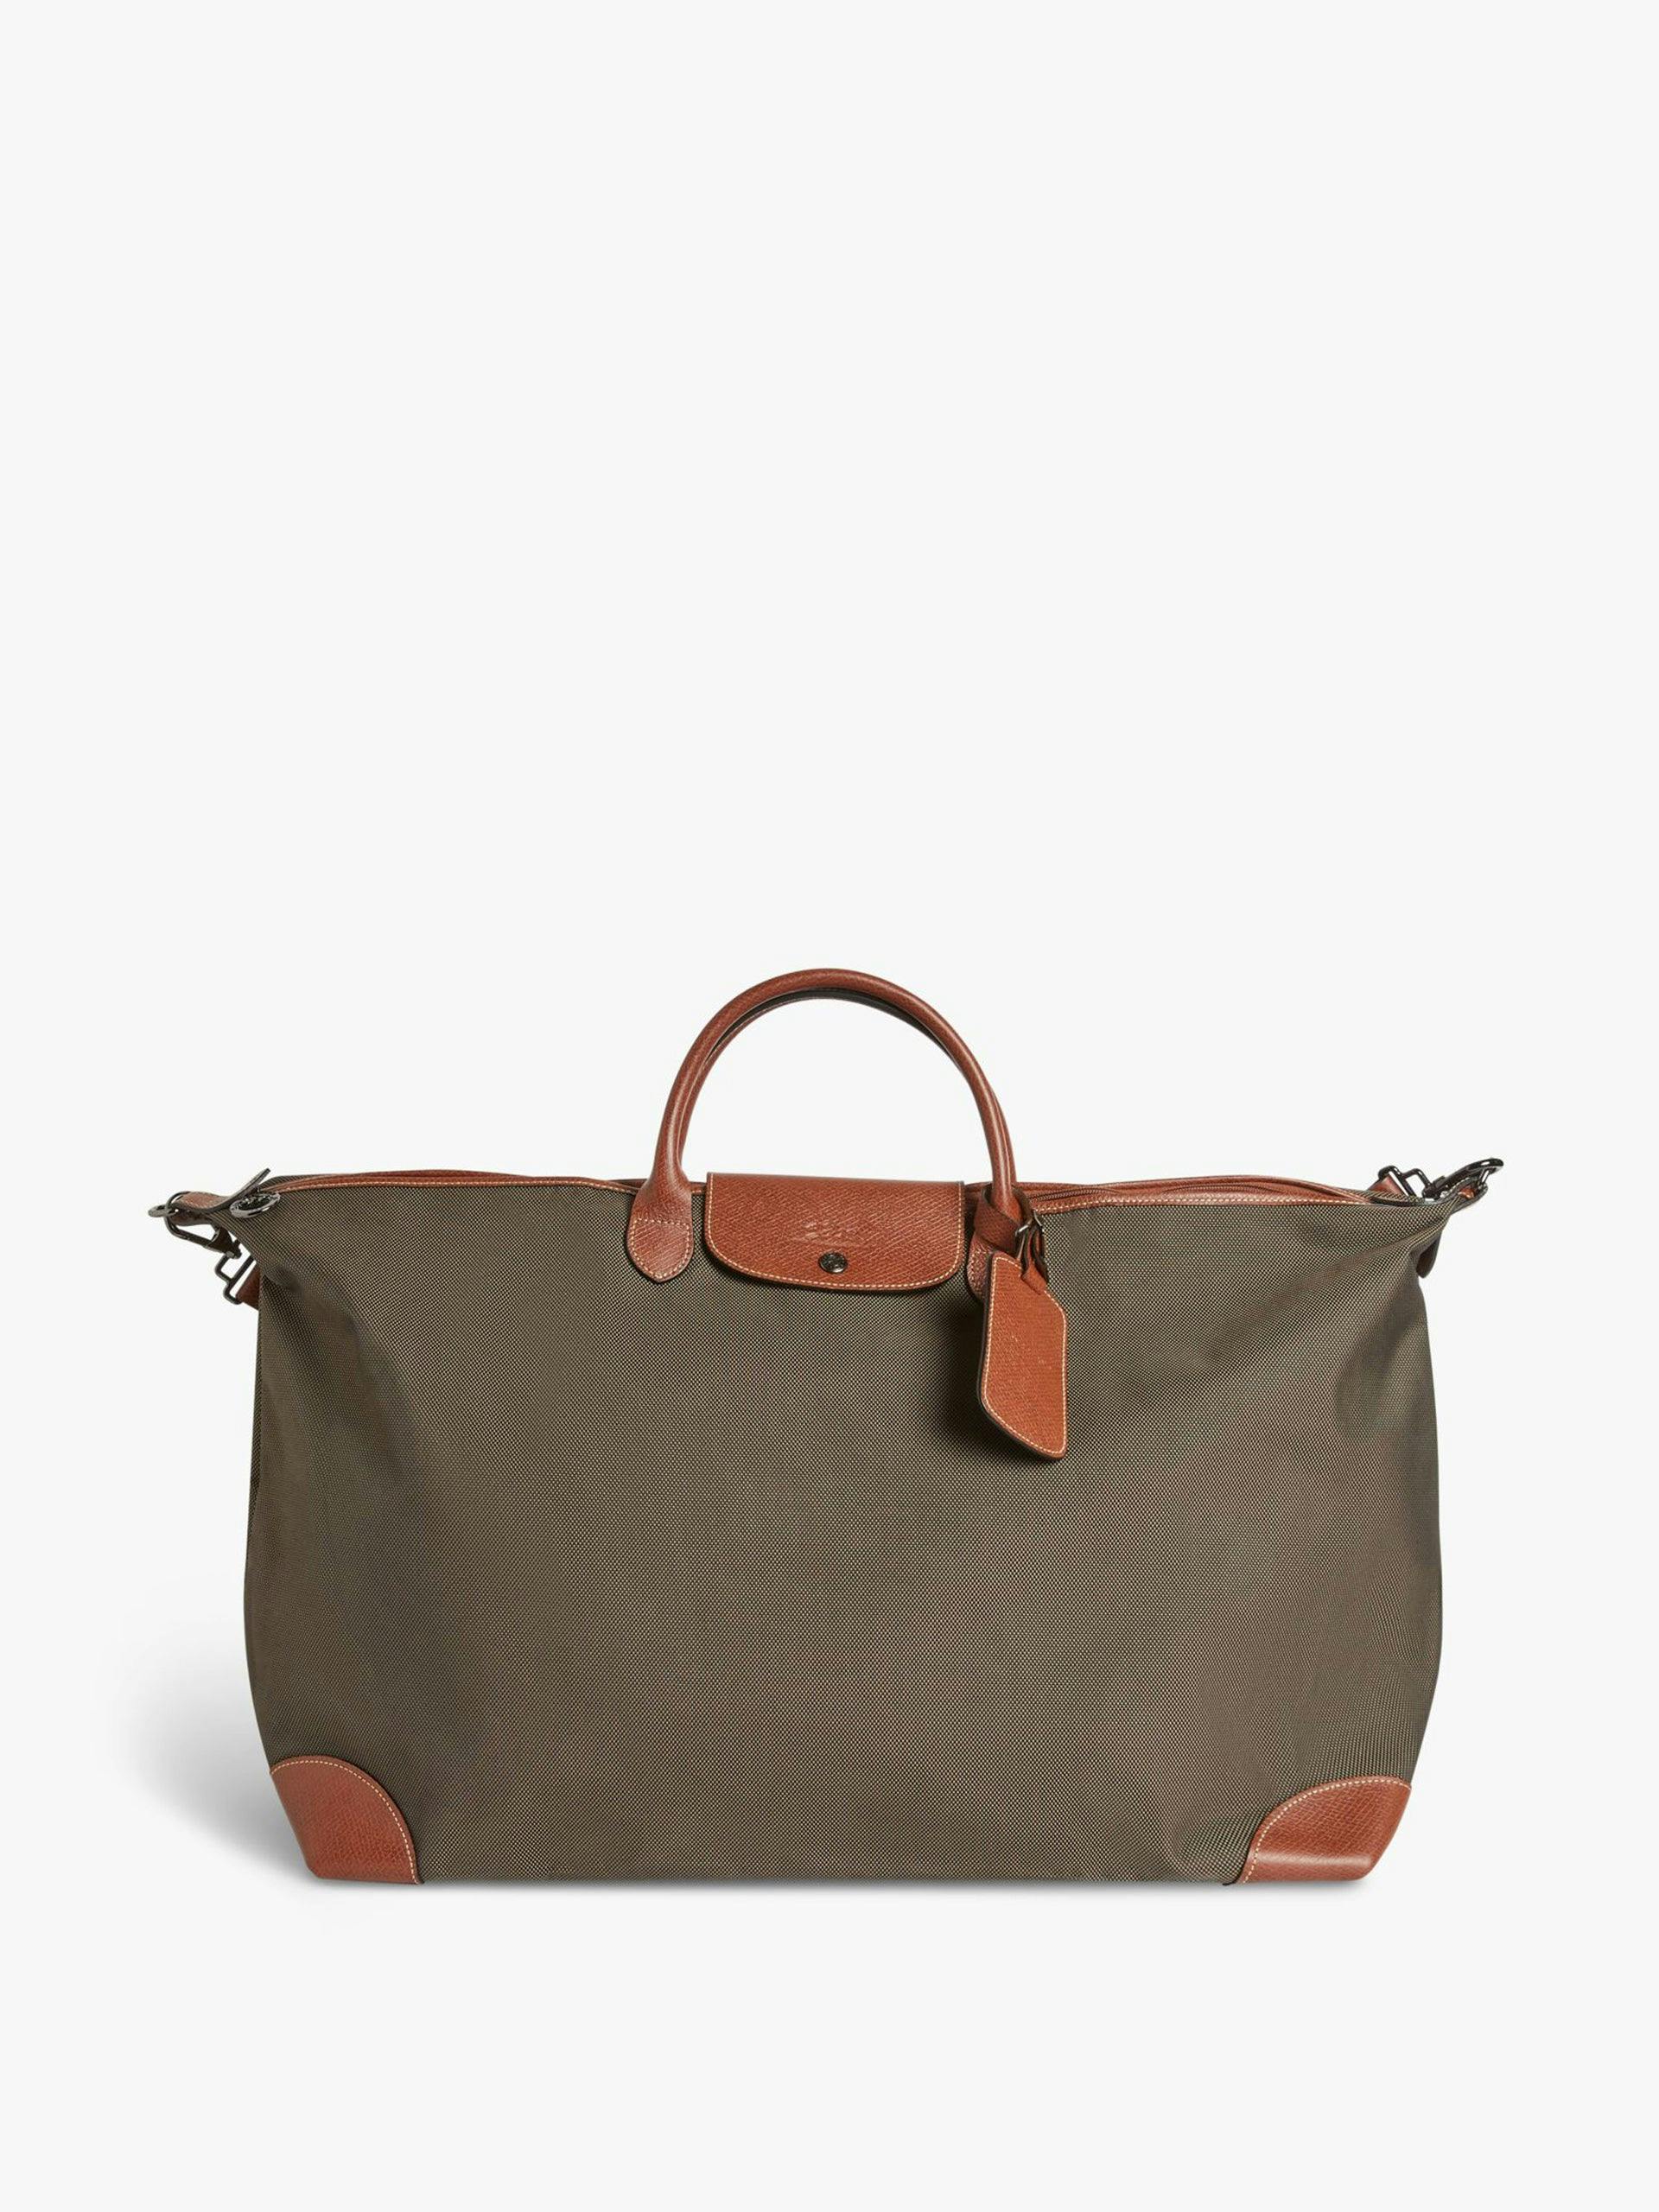 Extra large travel bag in brown